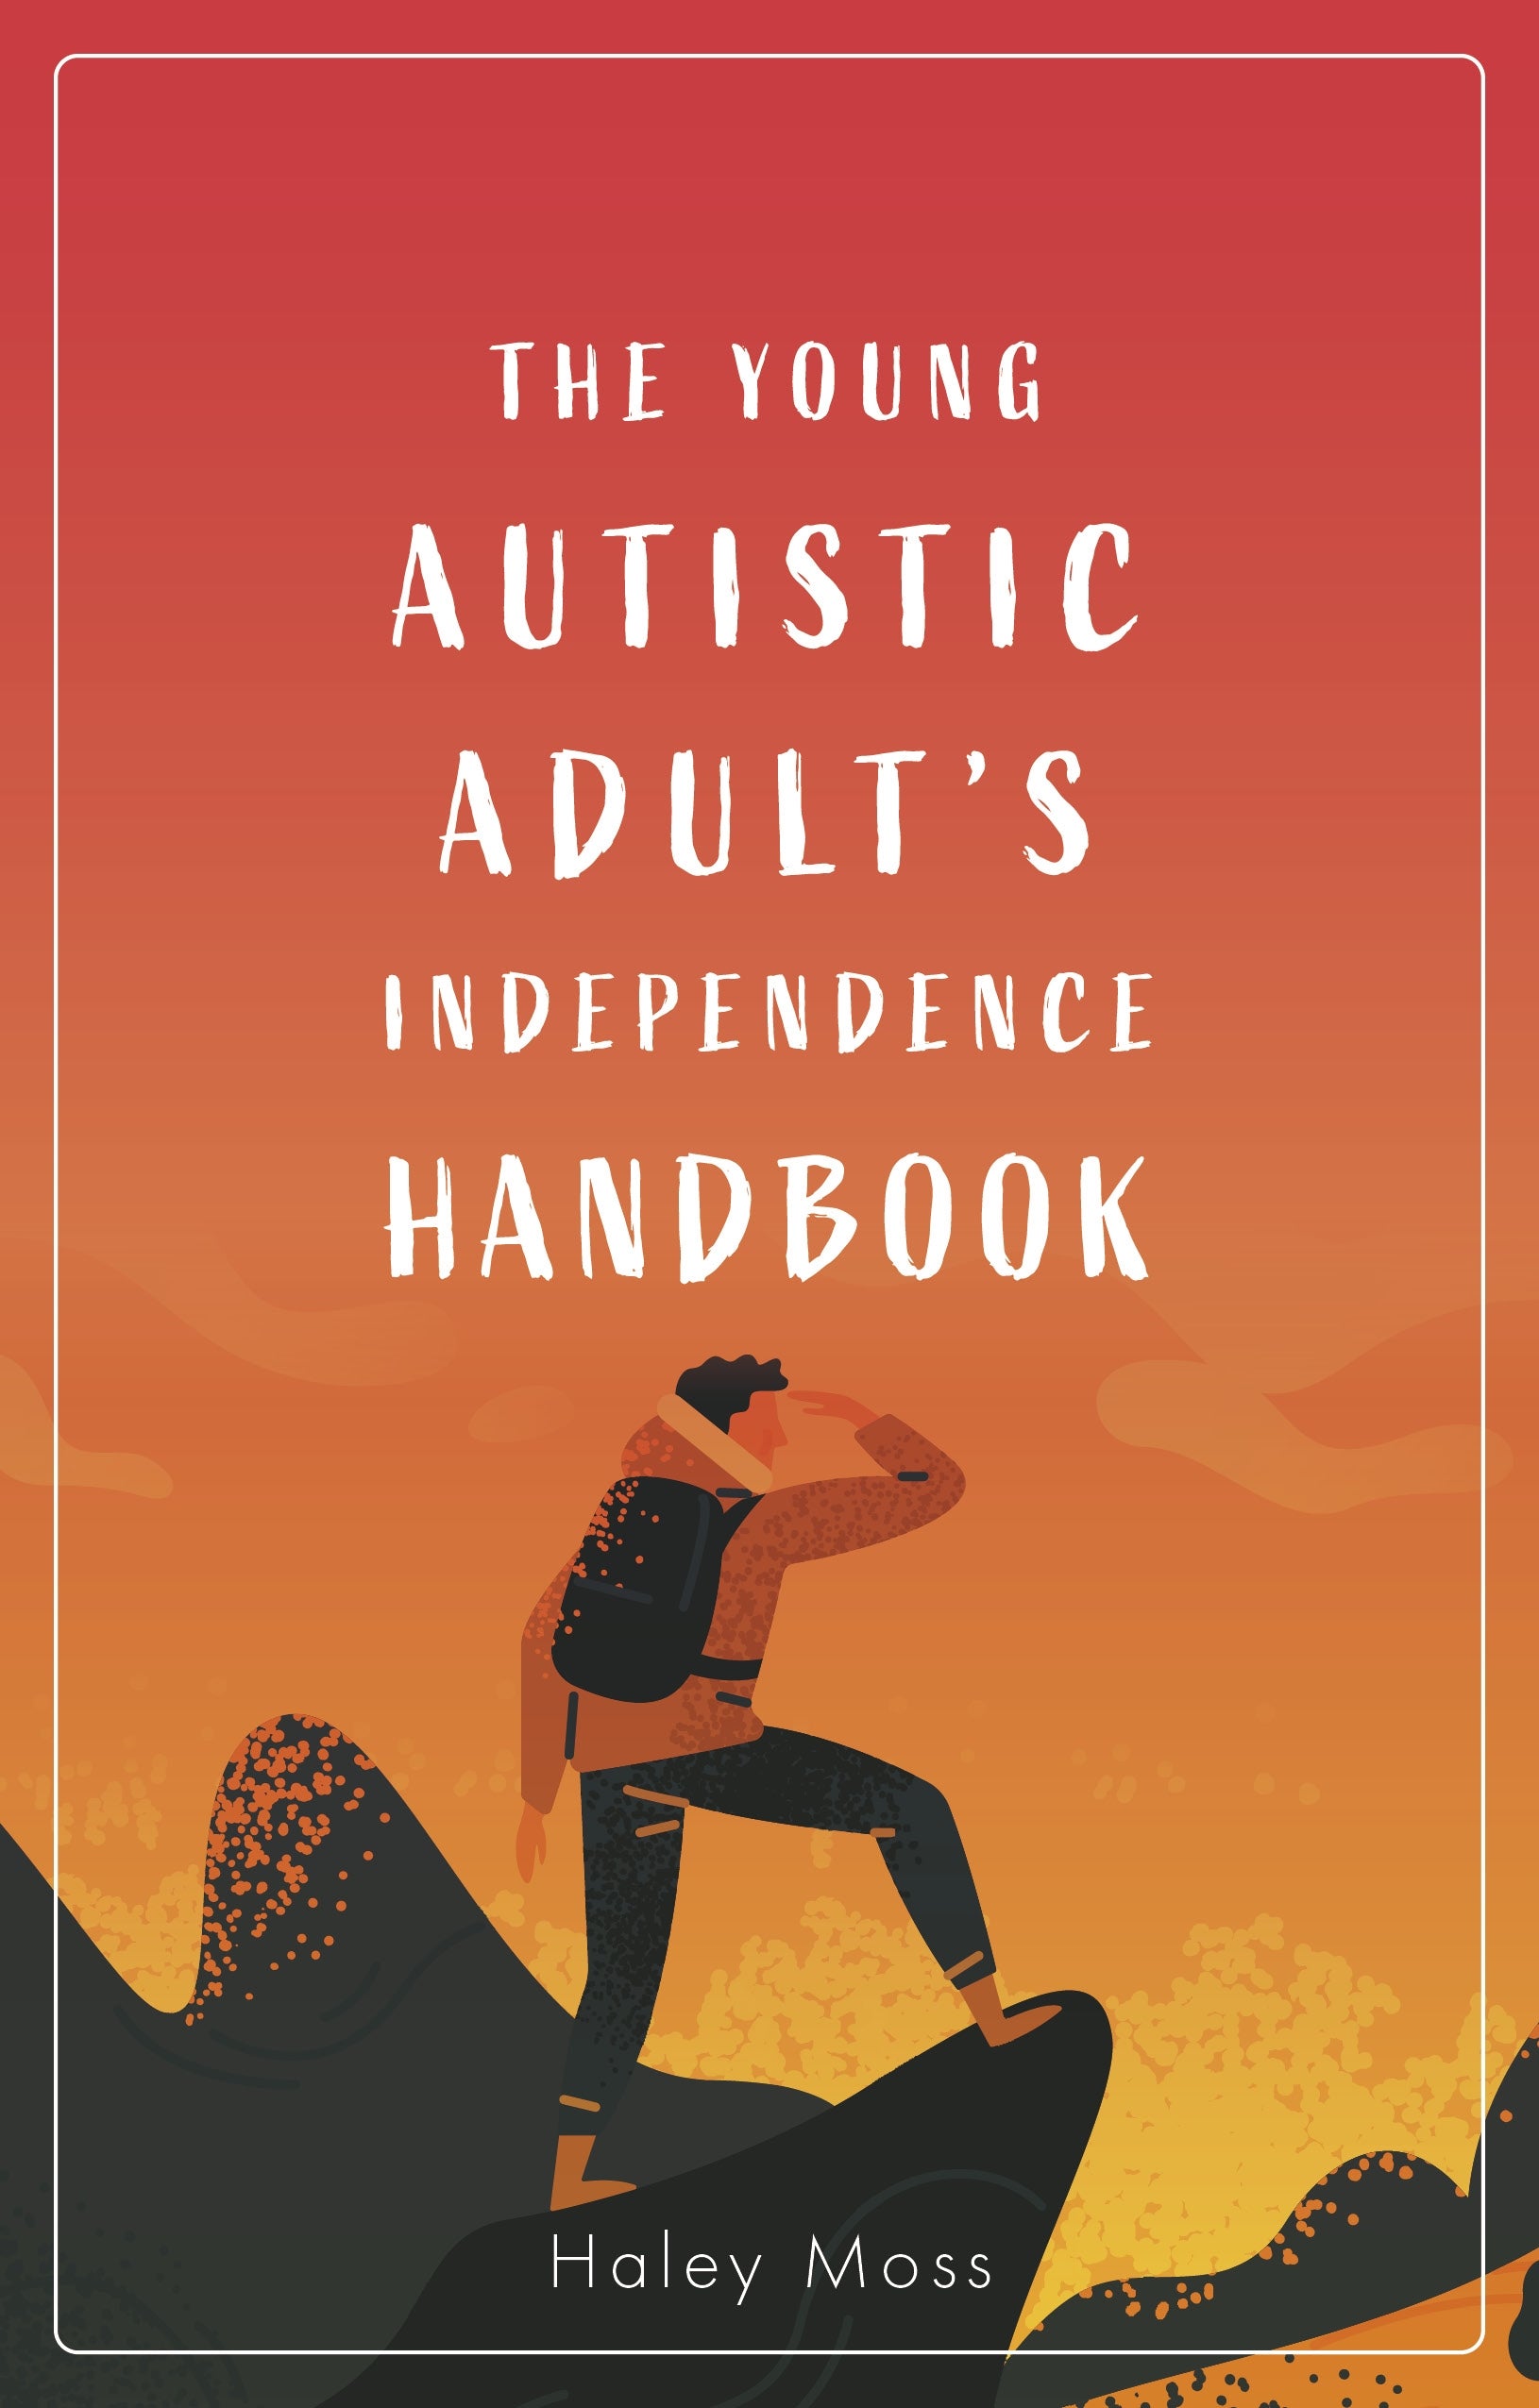 The Young Autistic Adult's Independence Handbook by Haley Moss